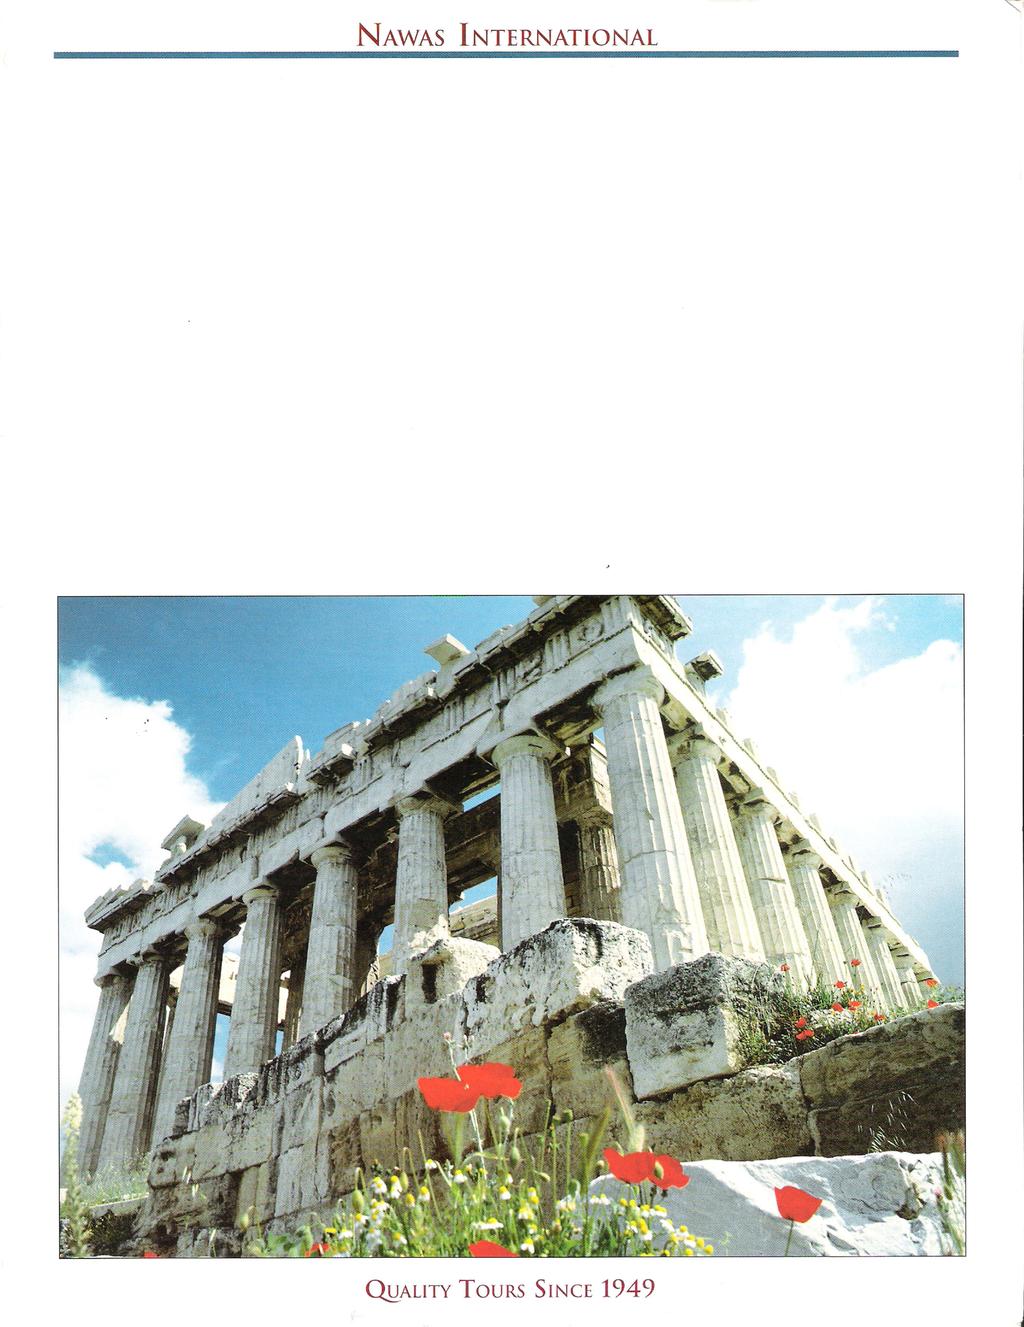 GREECE & THE GREEK ISLES IN THE FOOTSTEPS OF ST.